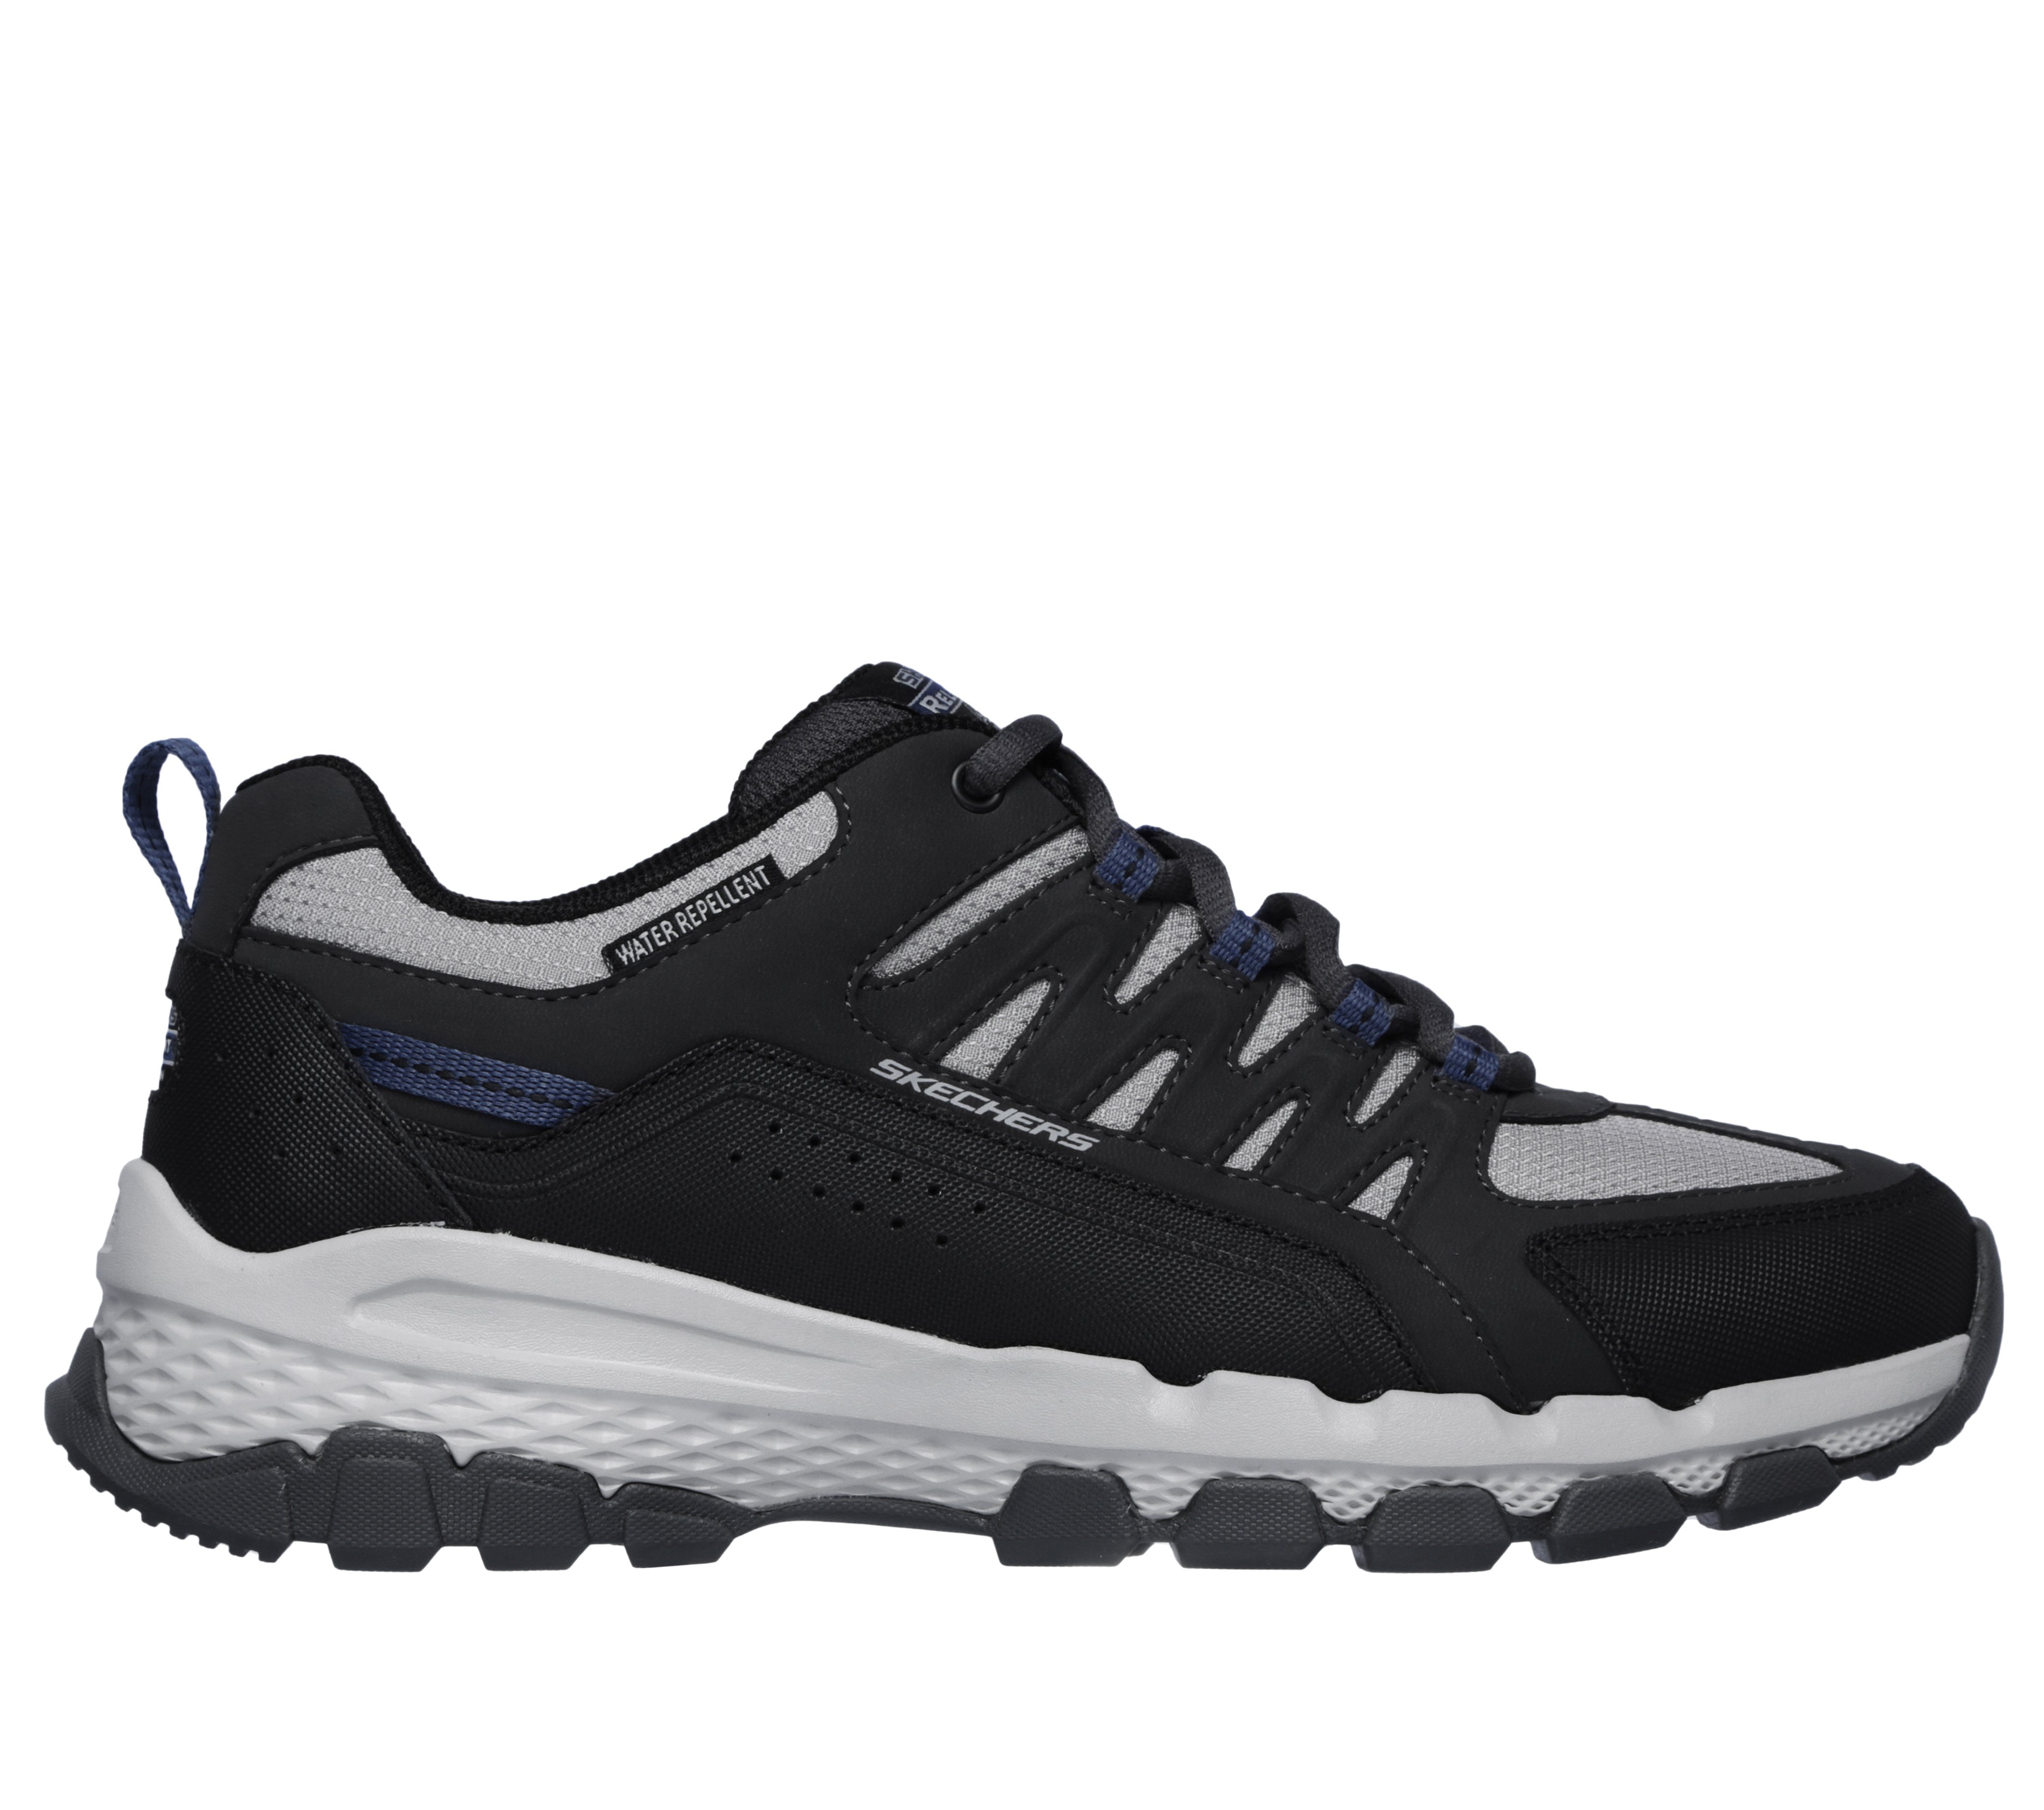 Skechers Relaxed Fit Outland | sites.unimi.it